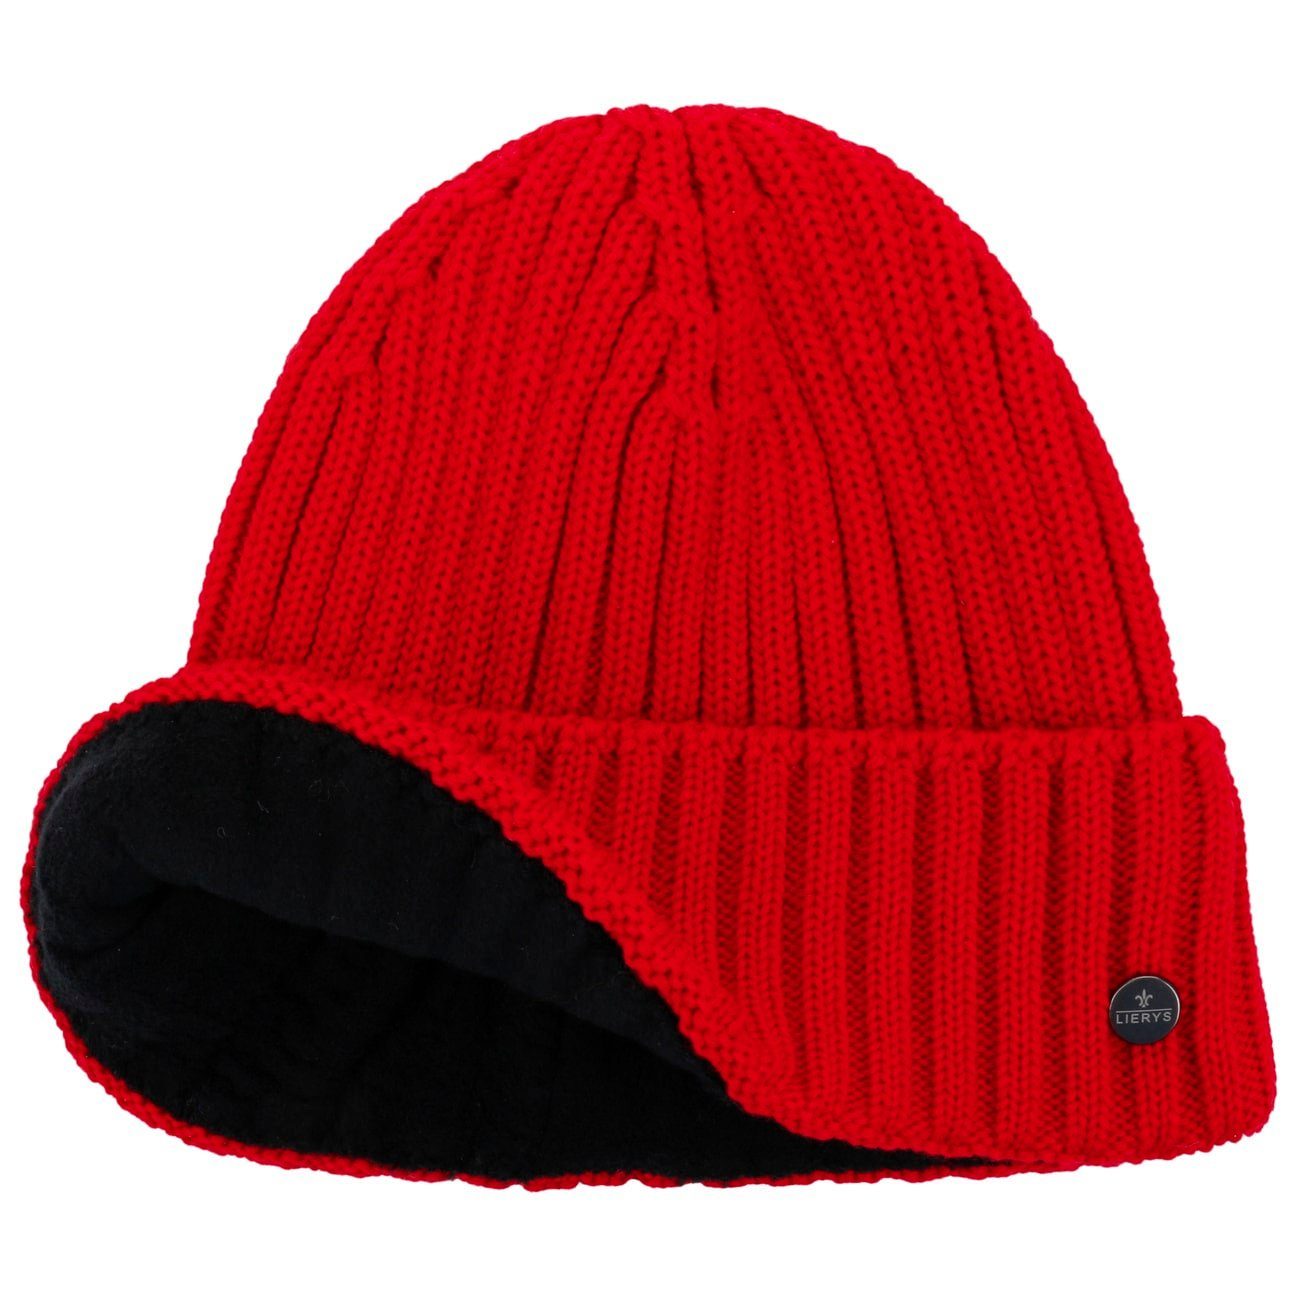 mit (1-St) Beanie in rot Beanie Lierys Made Germany Futter,